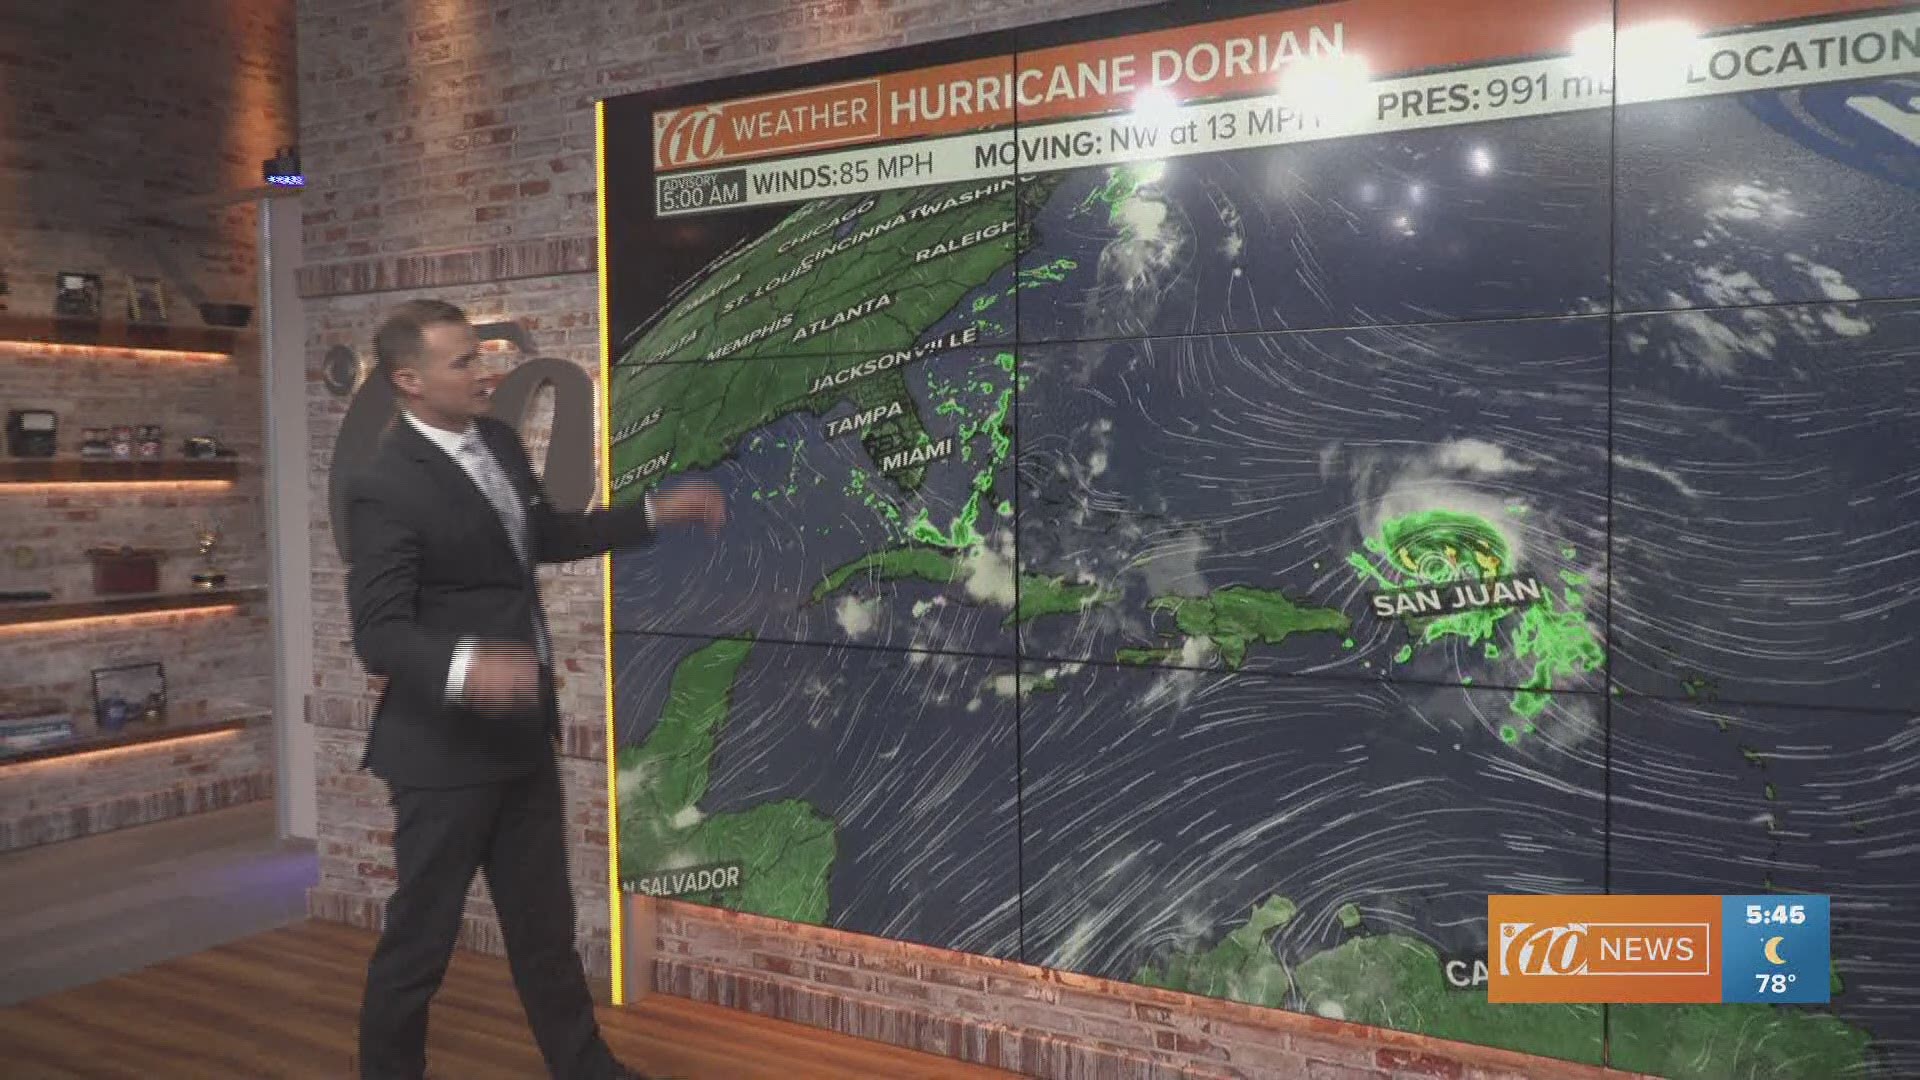 10News meteorologist Grant Gilmore explains Hurricane Dorian with the help of our weather computer, Max Reality. Max Reality helps you visualize weather data by using advanced Augmented Reality weather technology to create dynamic, 3-D images of weather events.